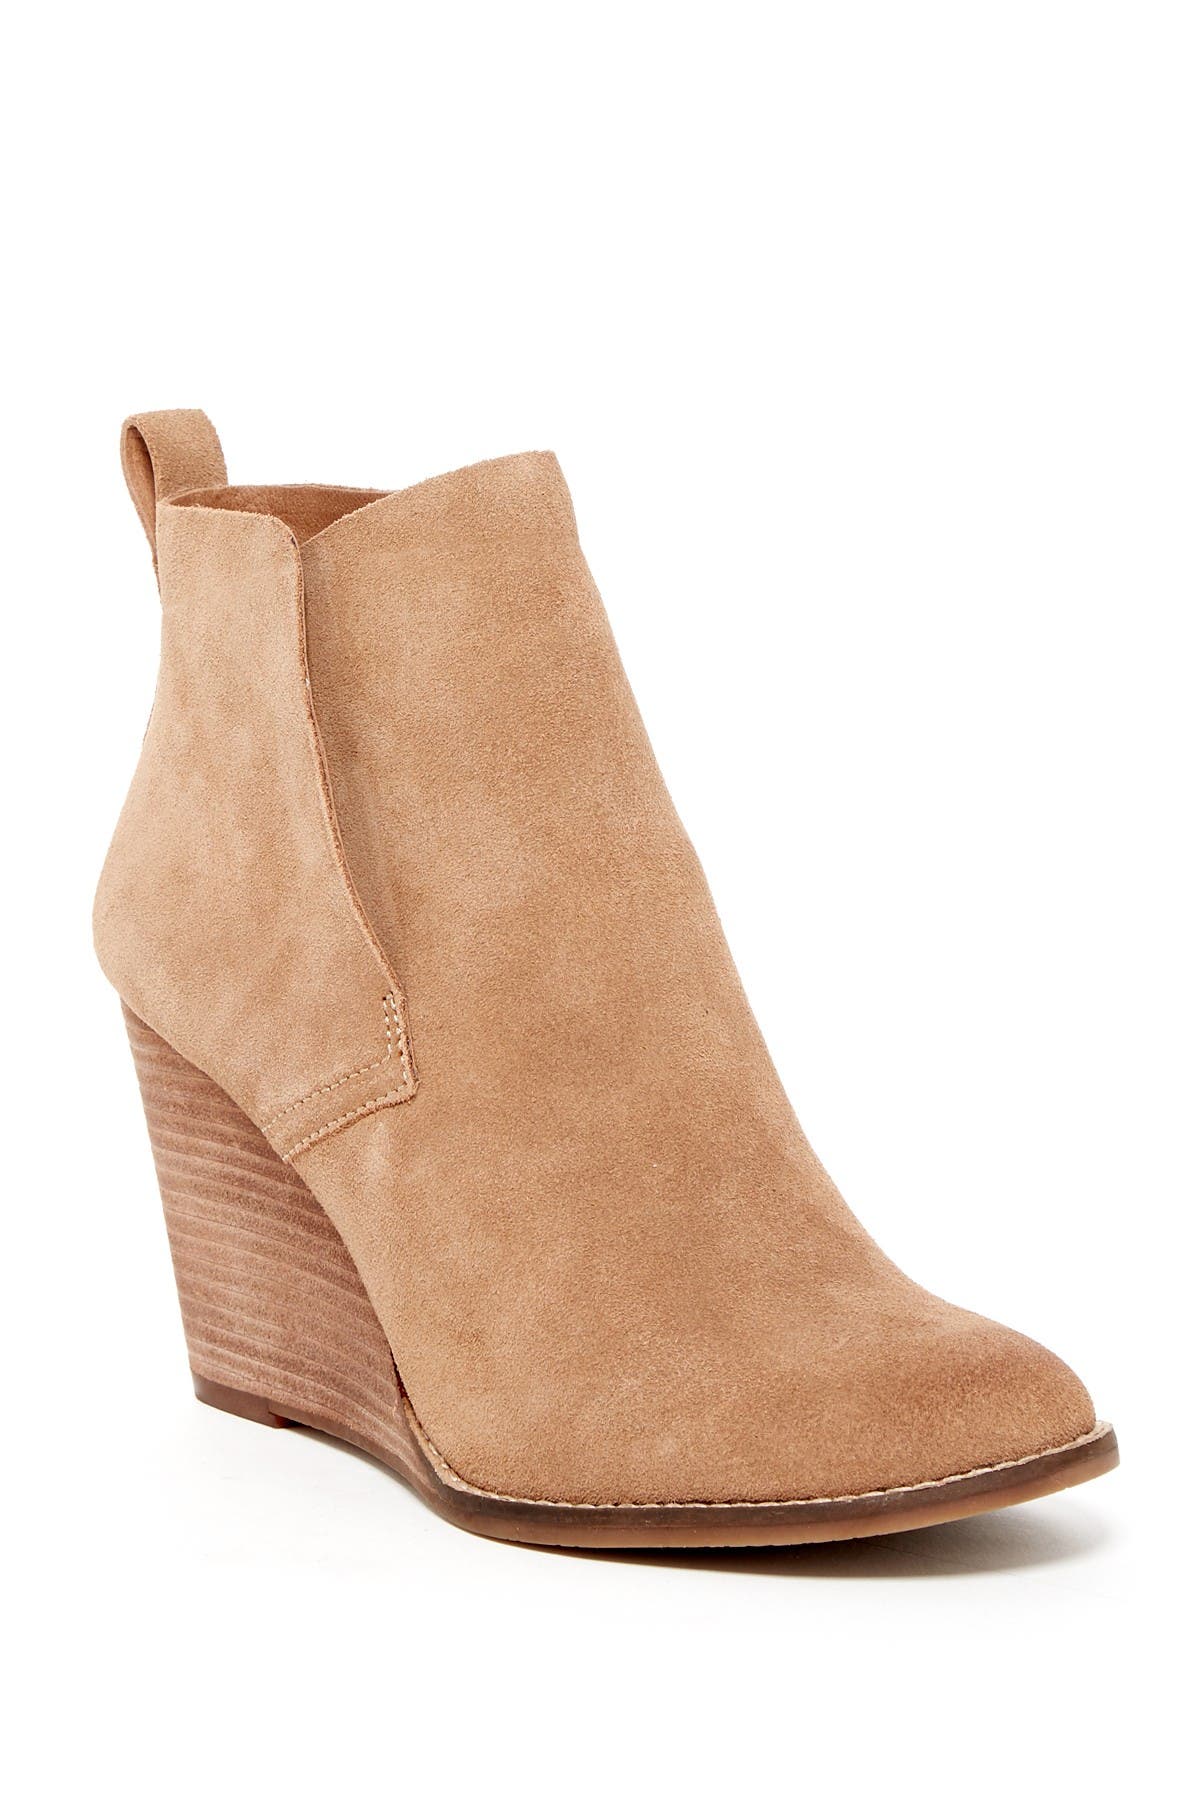 lucky brand yoniana wedge bootie